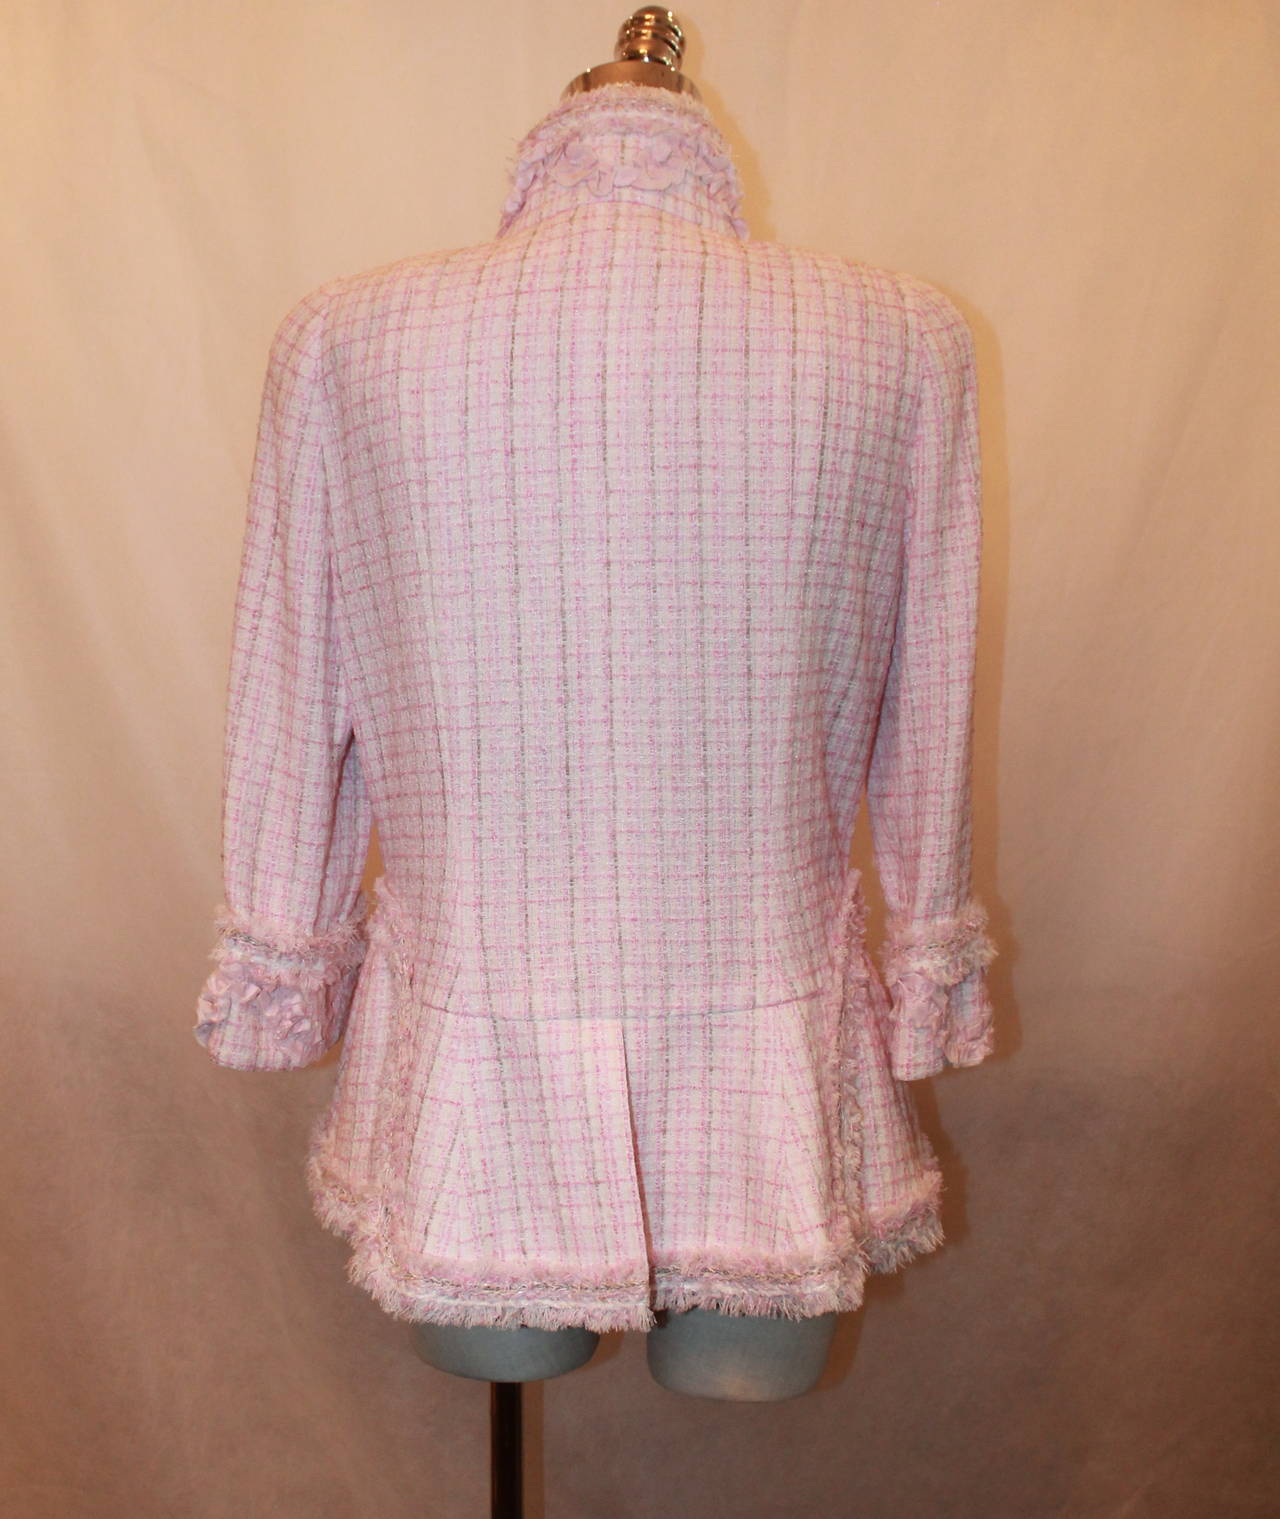 Women's Chanel 2013 Light Pink & White Tweed Jacket with Fringe Detail - 44 - NWT